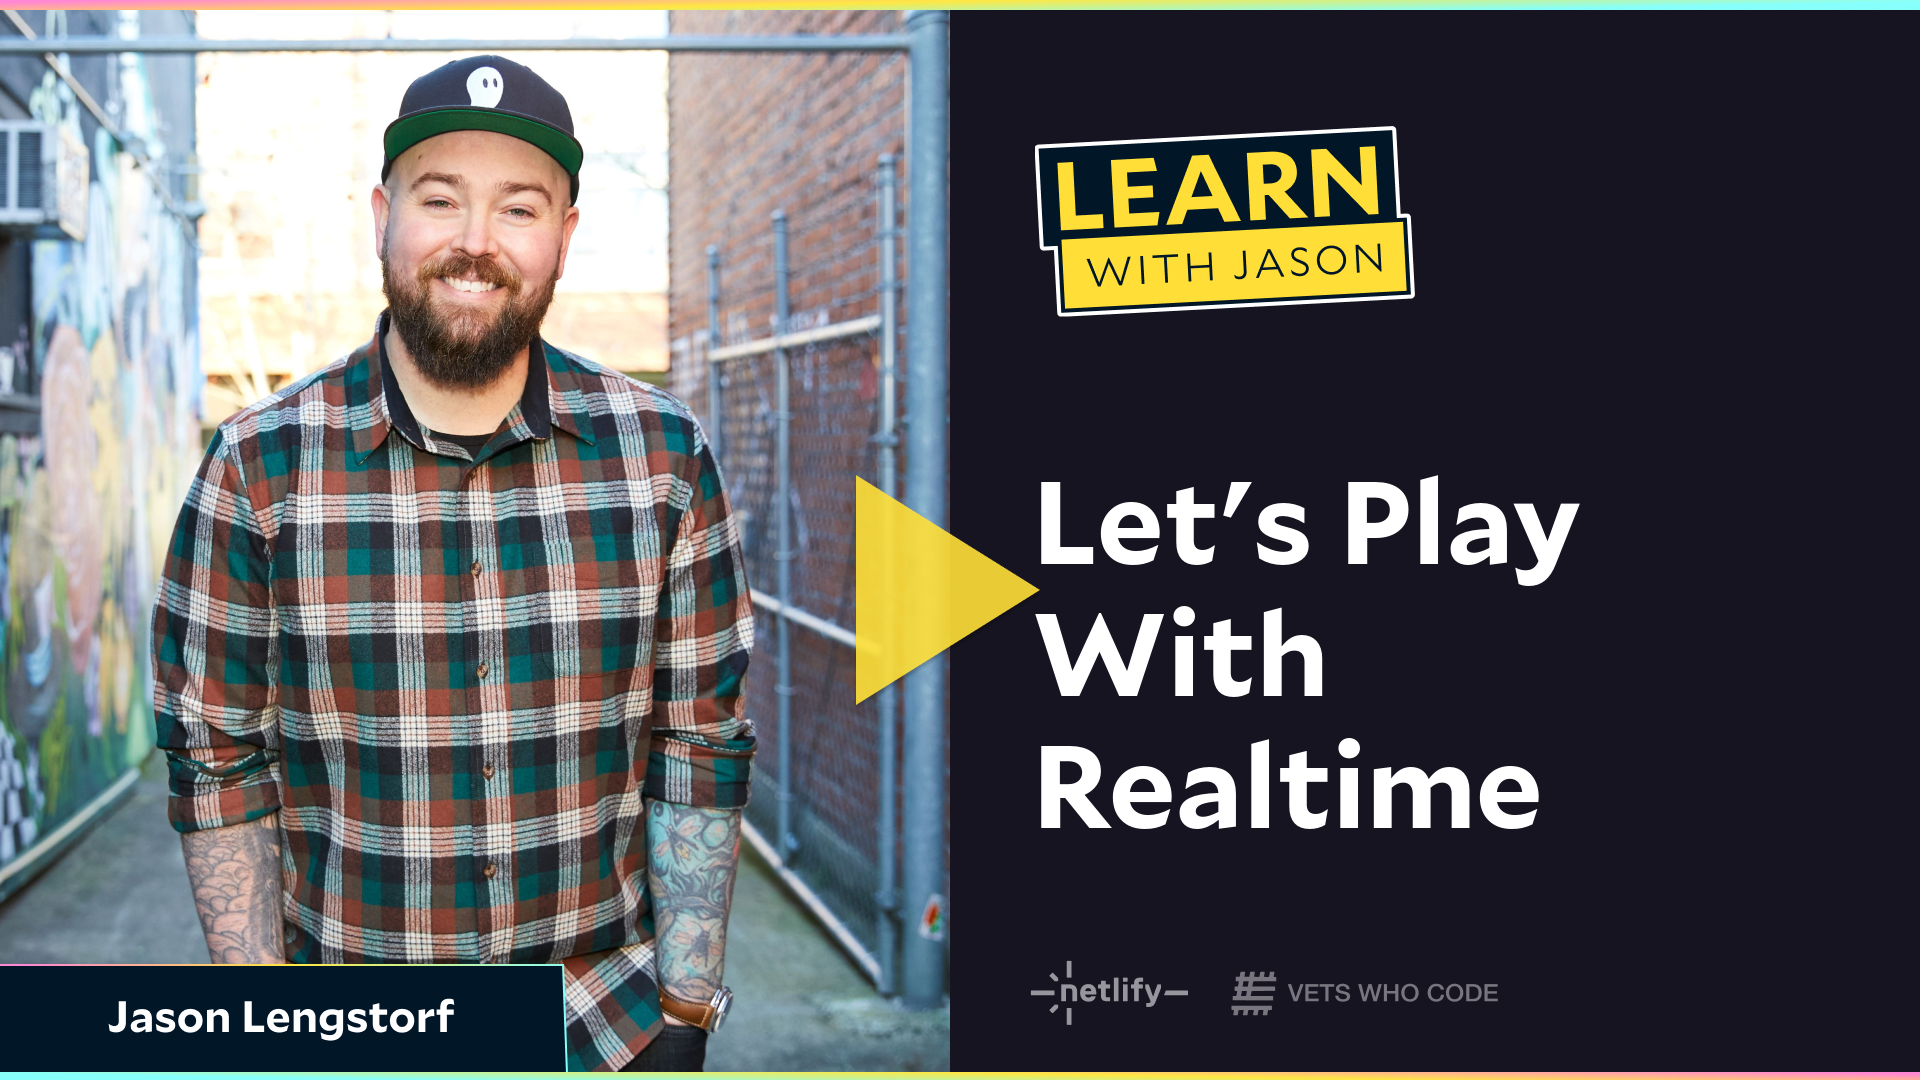 Let's Play With Realtime (with Jason Lengstorf)